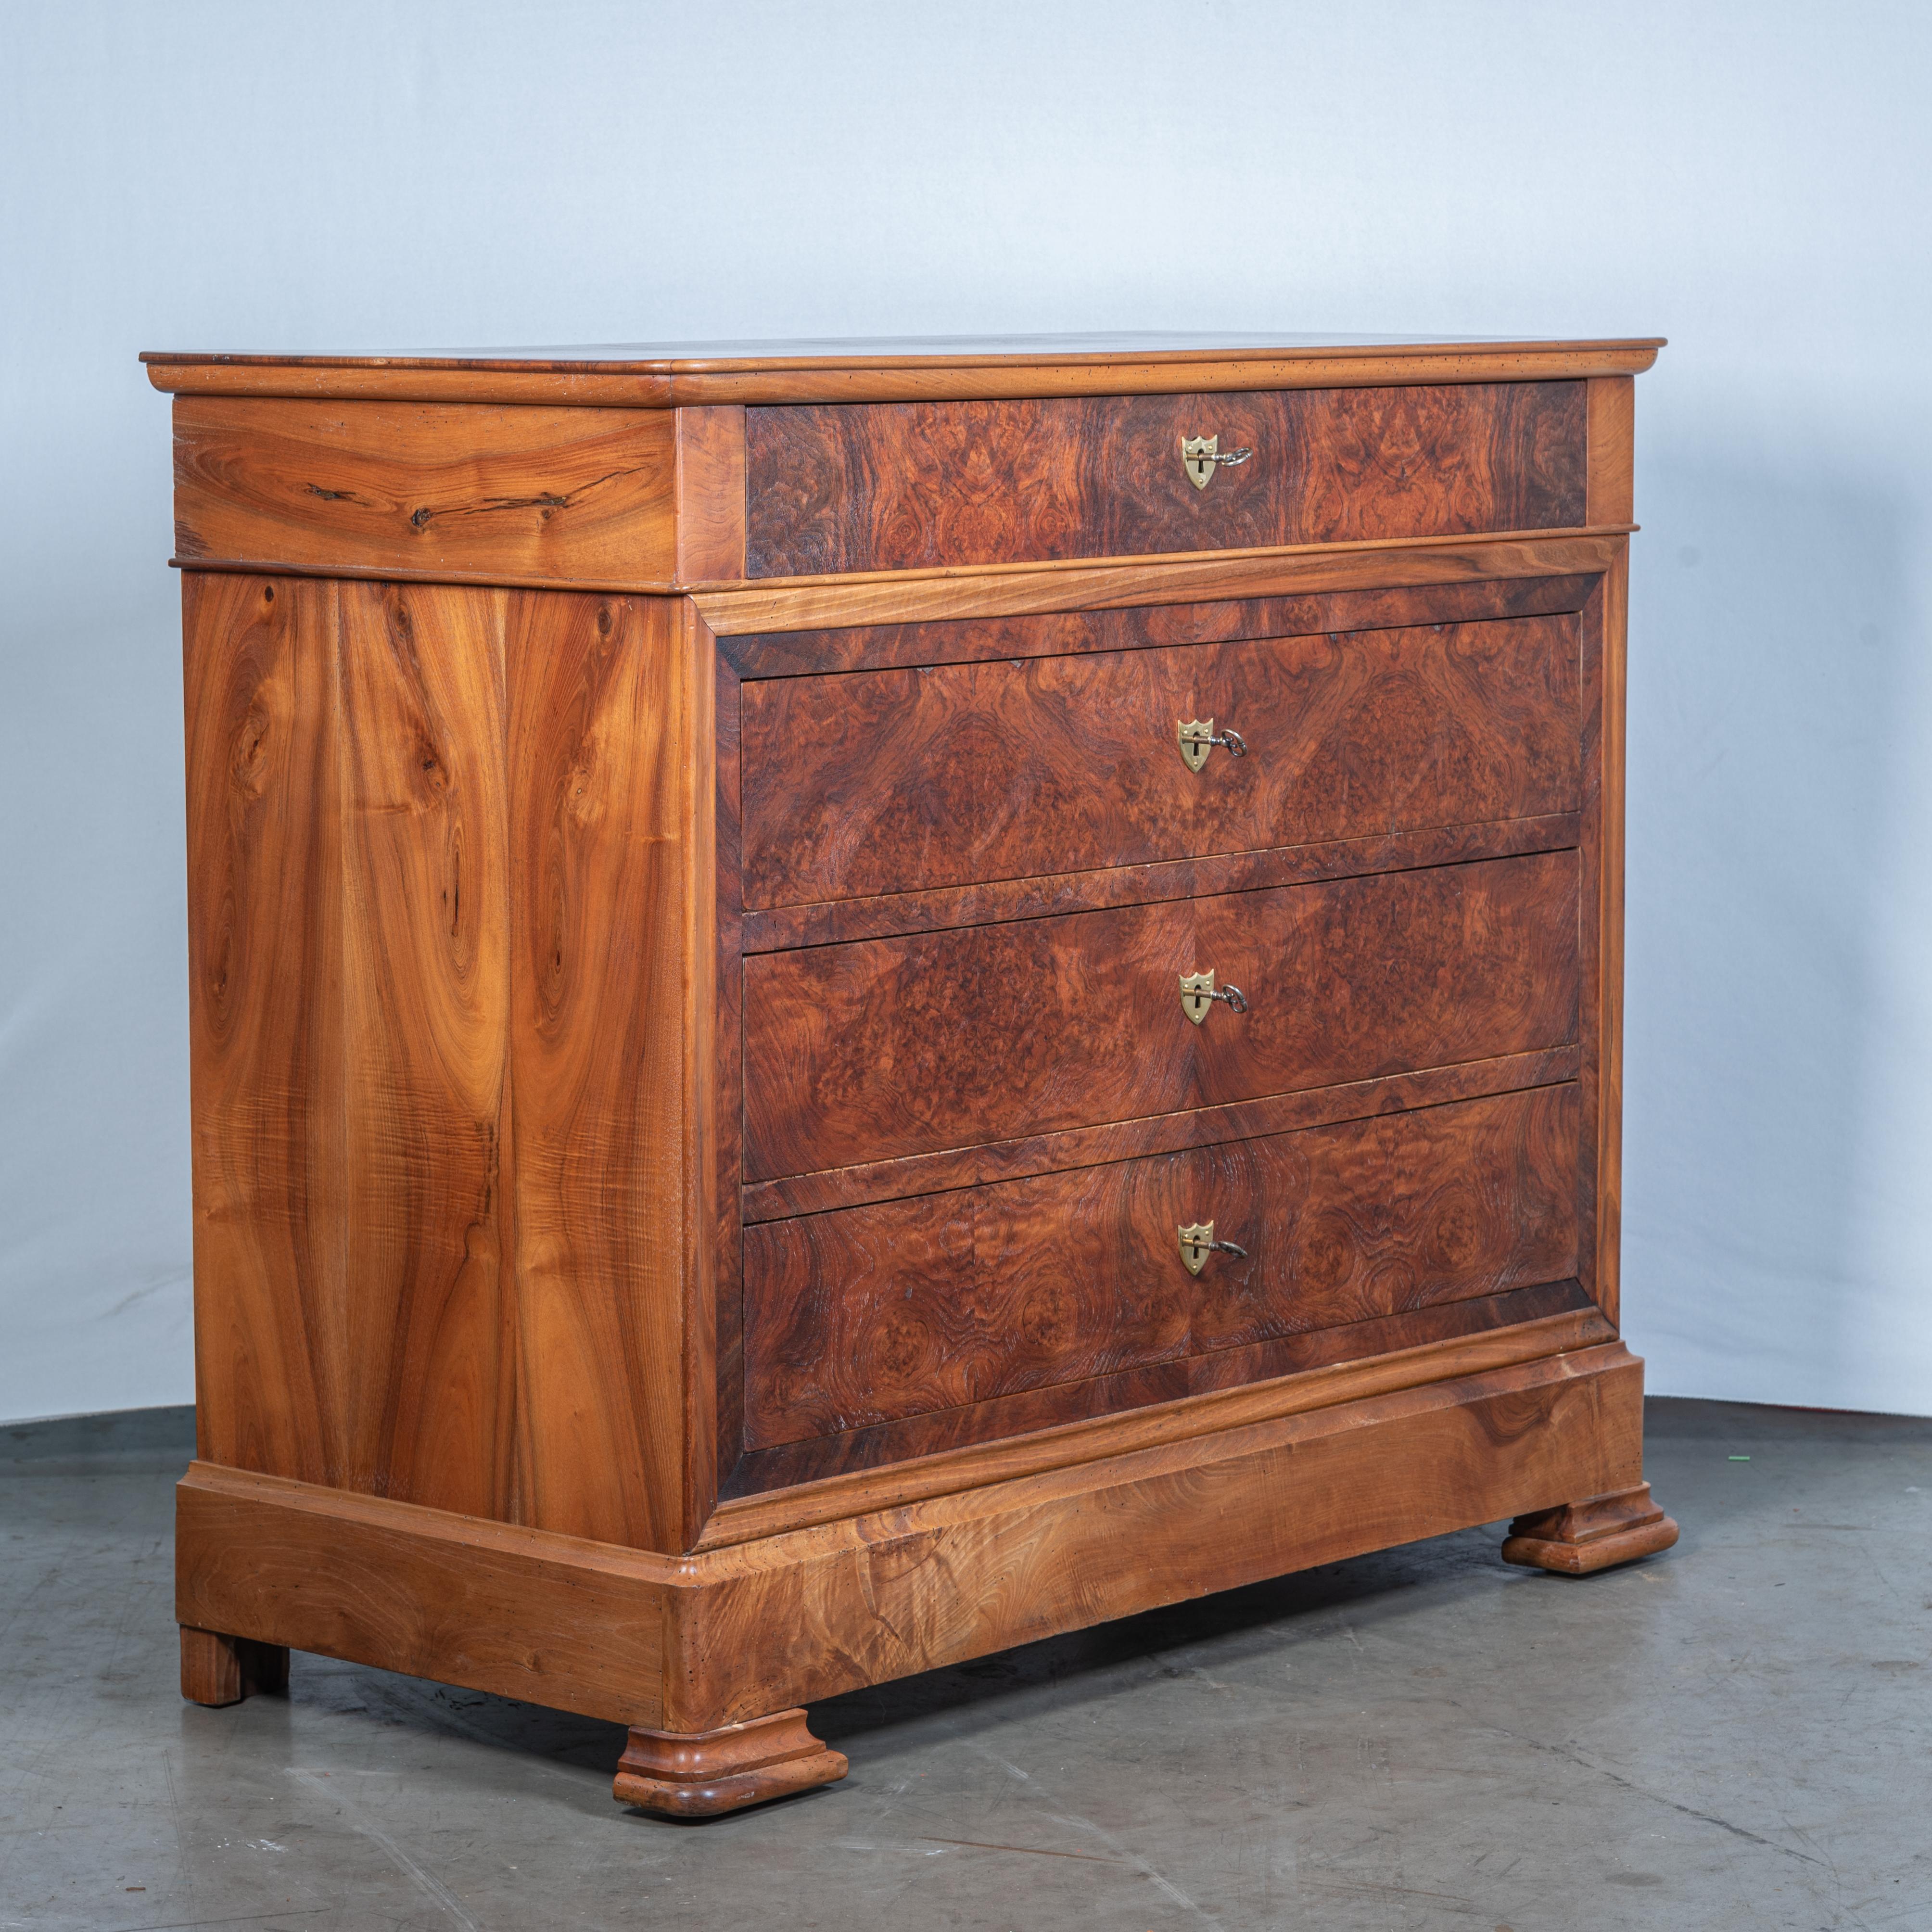 The 19th Century French Louis Philippe Burl Walnut Commode is a stunning testament to the exquisite craftsmanship and refined taste of the Louis Philippe era.

King Louis Philippe, who reigned from 1830 to 1848, was known for his understated yet